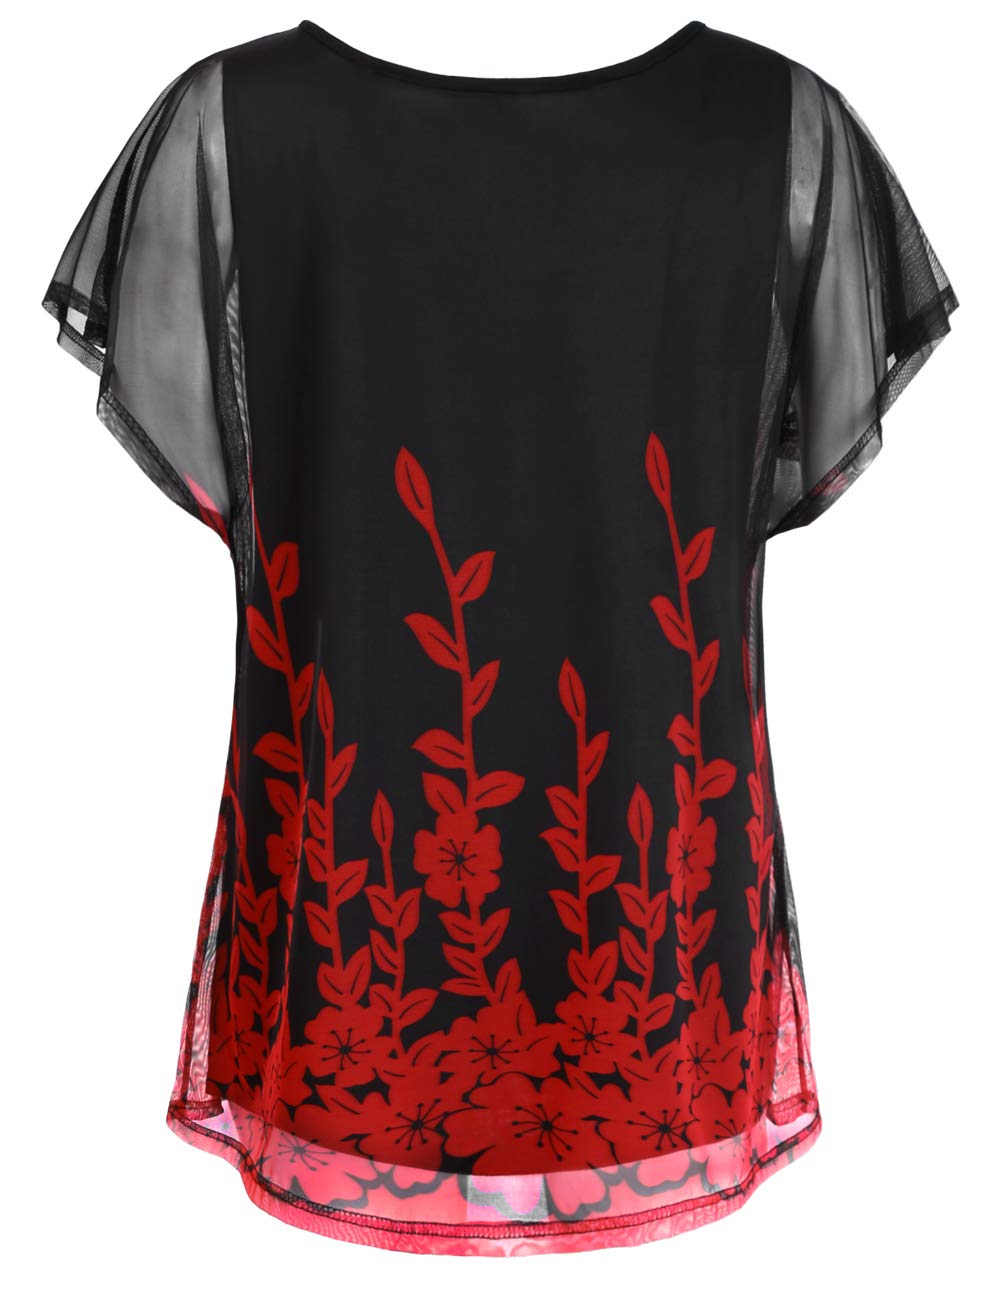 BAISHENGGT Womens Red Floral Flouncing Flared Short Sleeve Pleated Front Mesh Blouses Tops